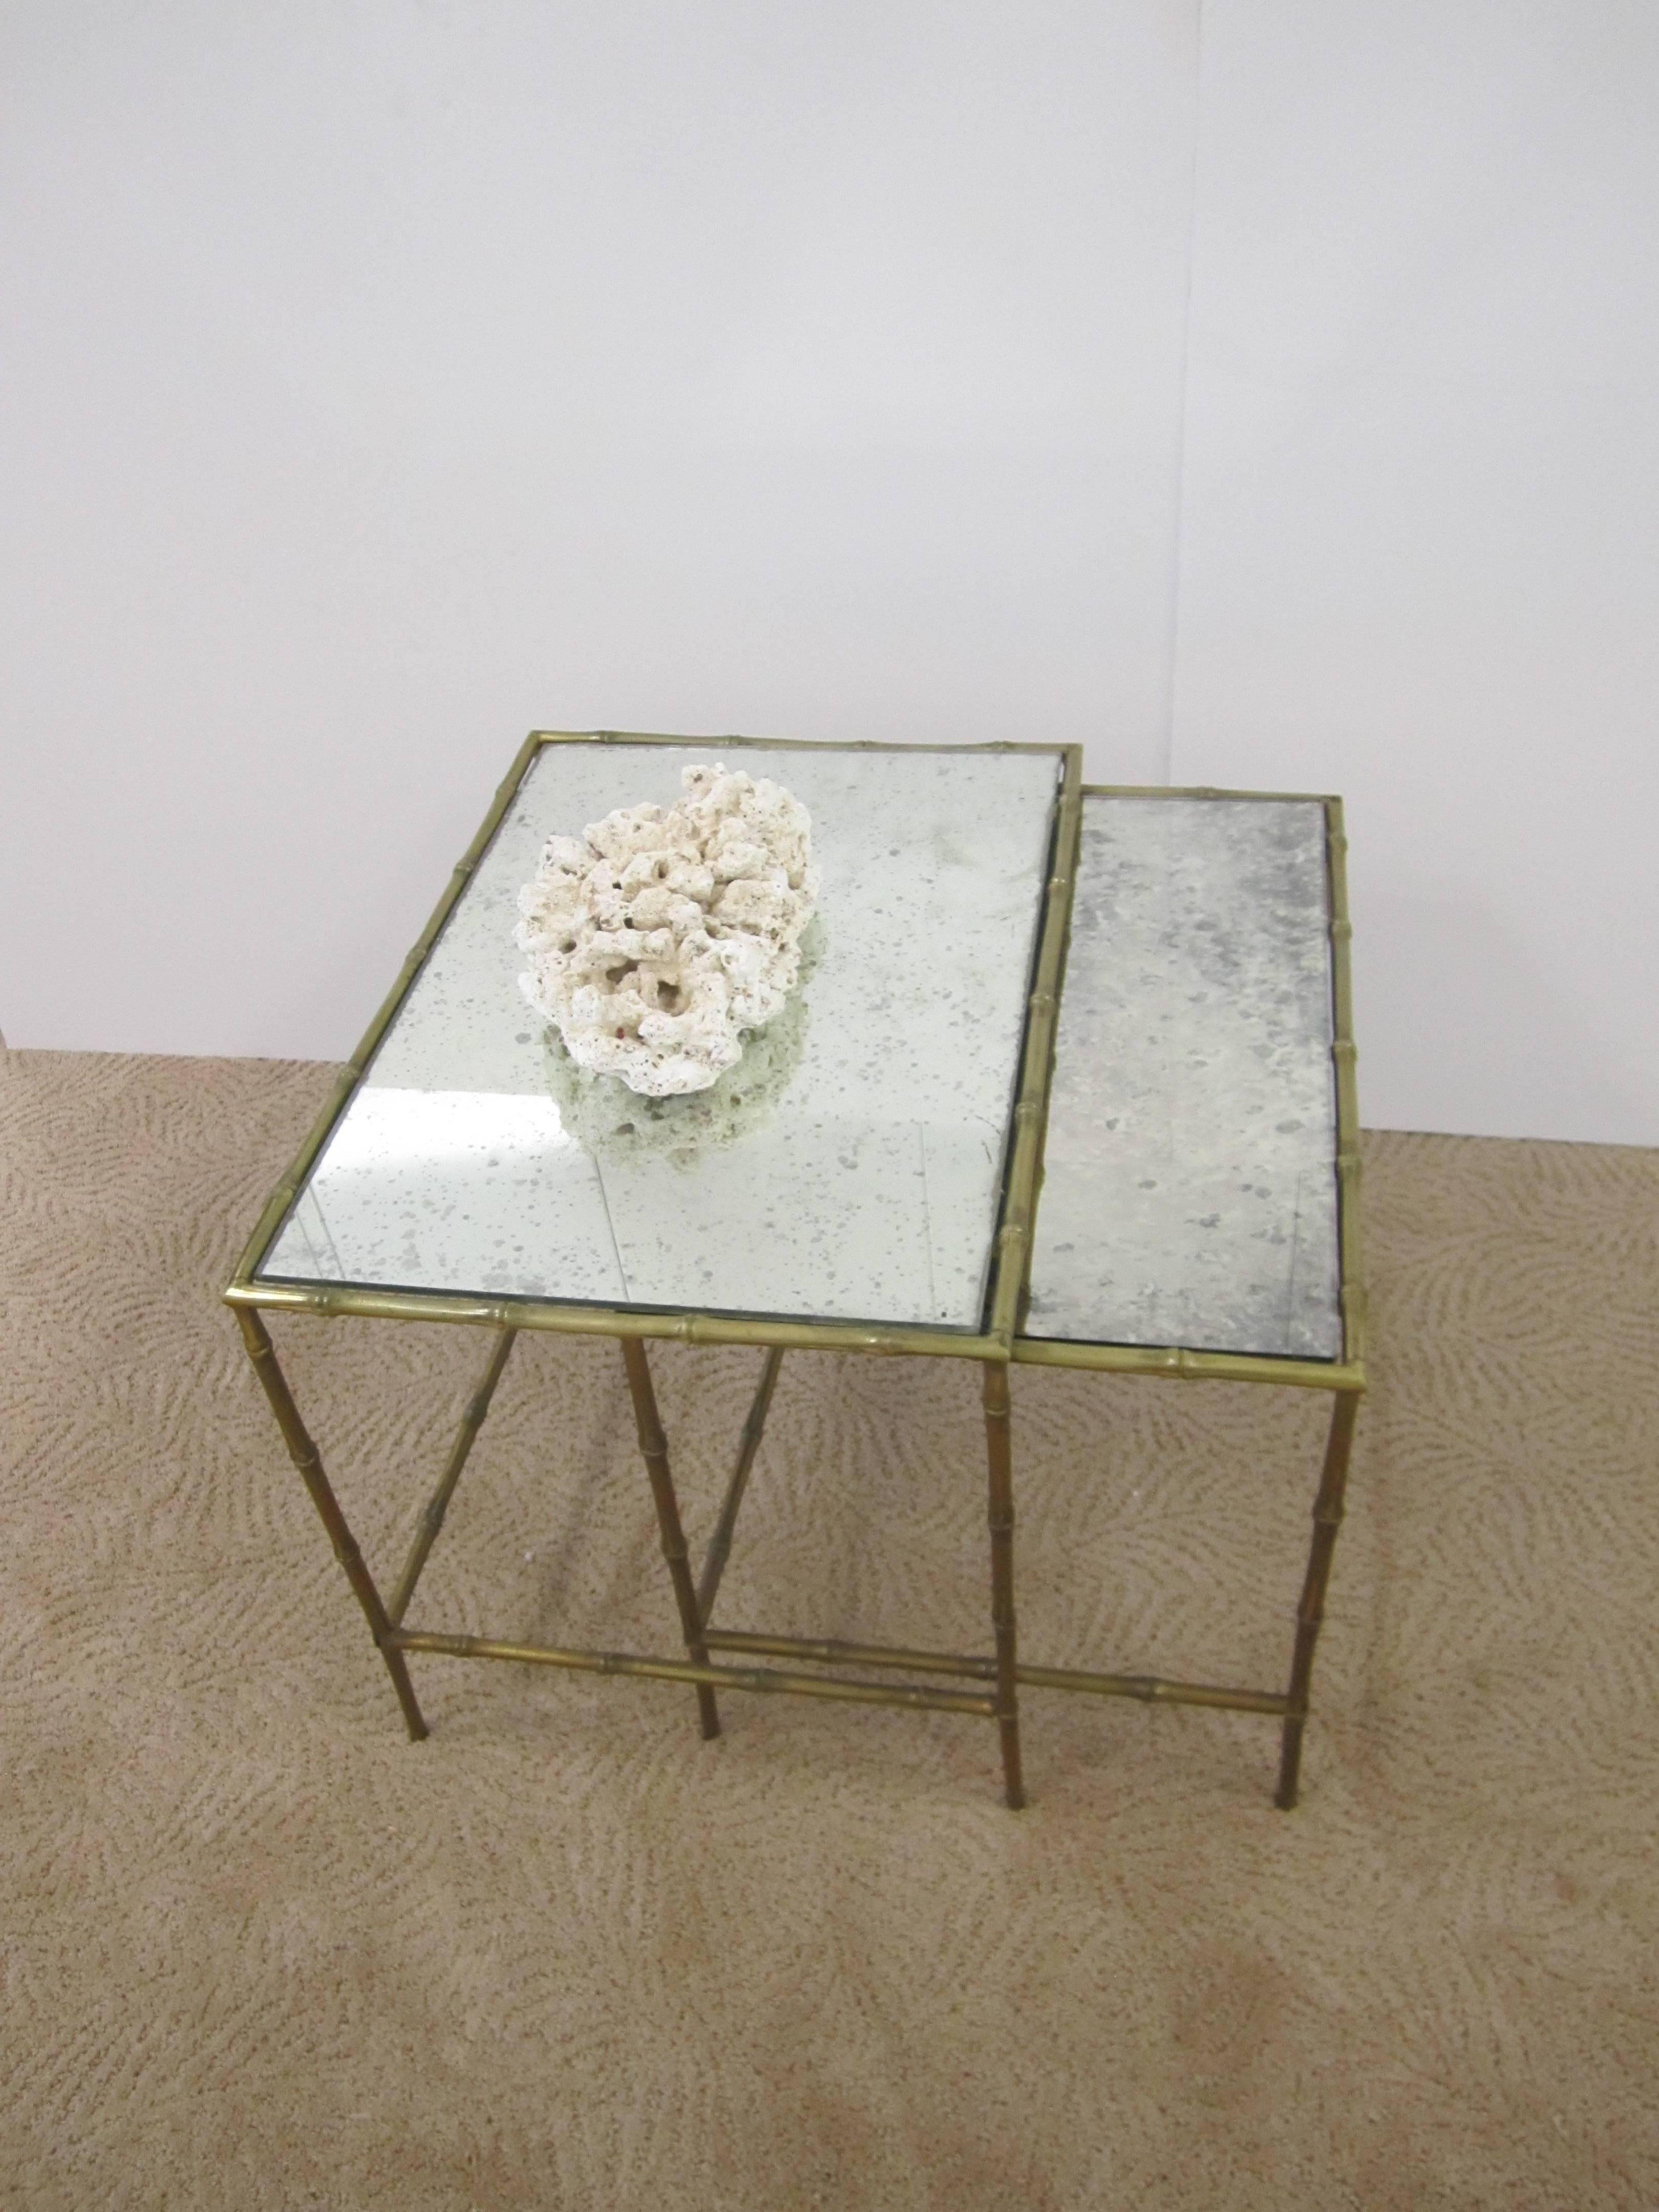 A beautiful and substantial pair/set of solid brass nesting, side, or end tables, circa mid-20th century, France. Brass frame has a 'bamboo' design and eglomise mirrored glass tops. Table style is attributed to French designer Maison Baguès.